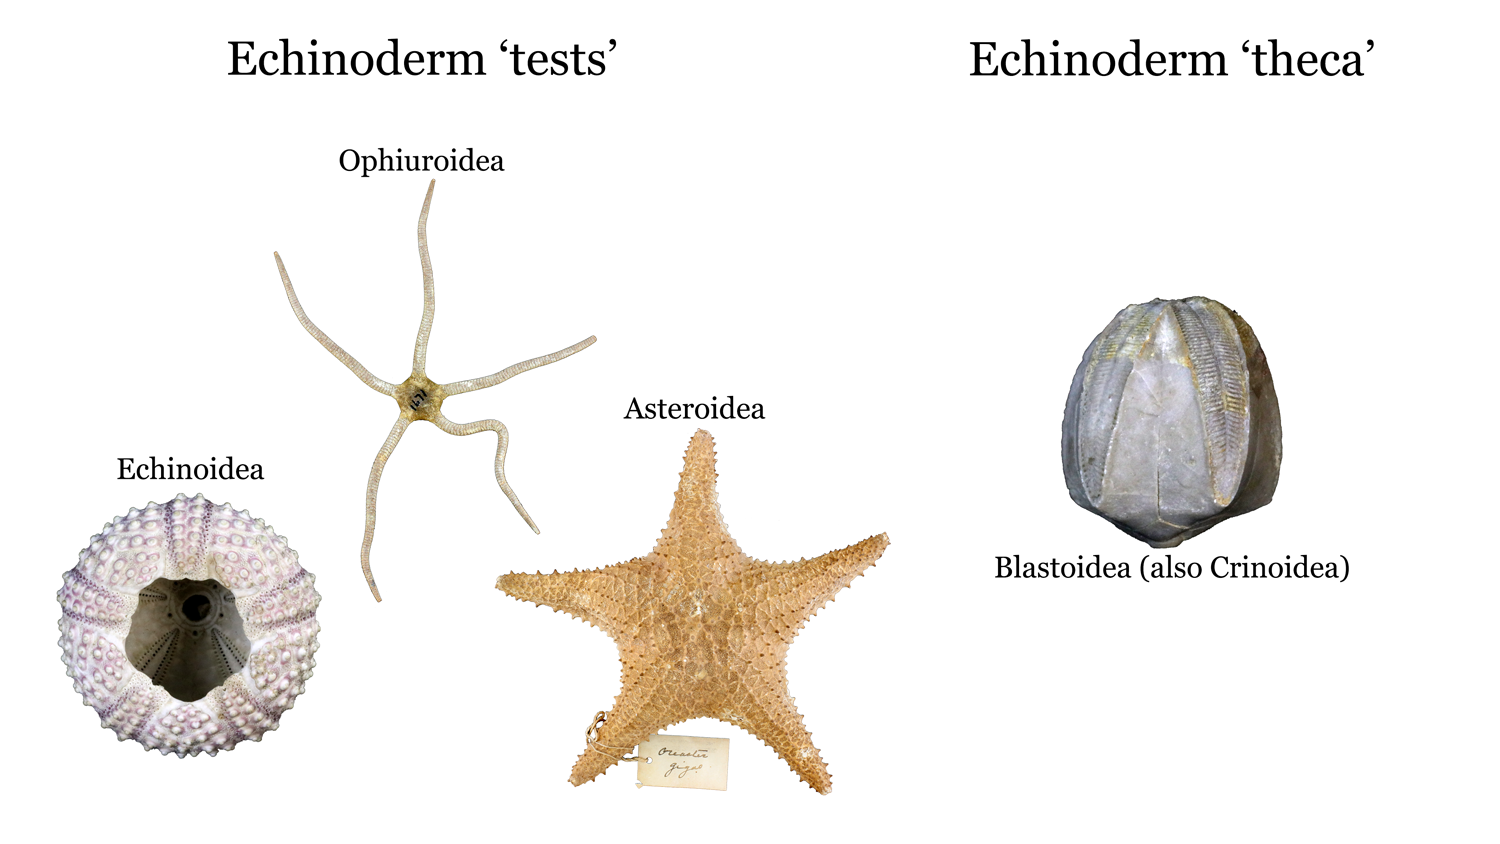 Images of echinoderm tests and theca examples